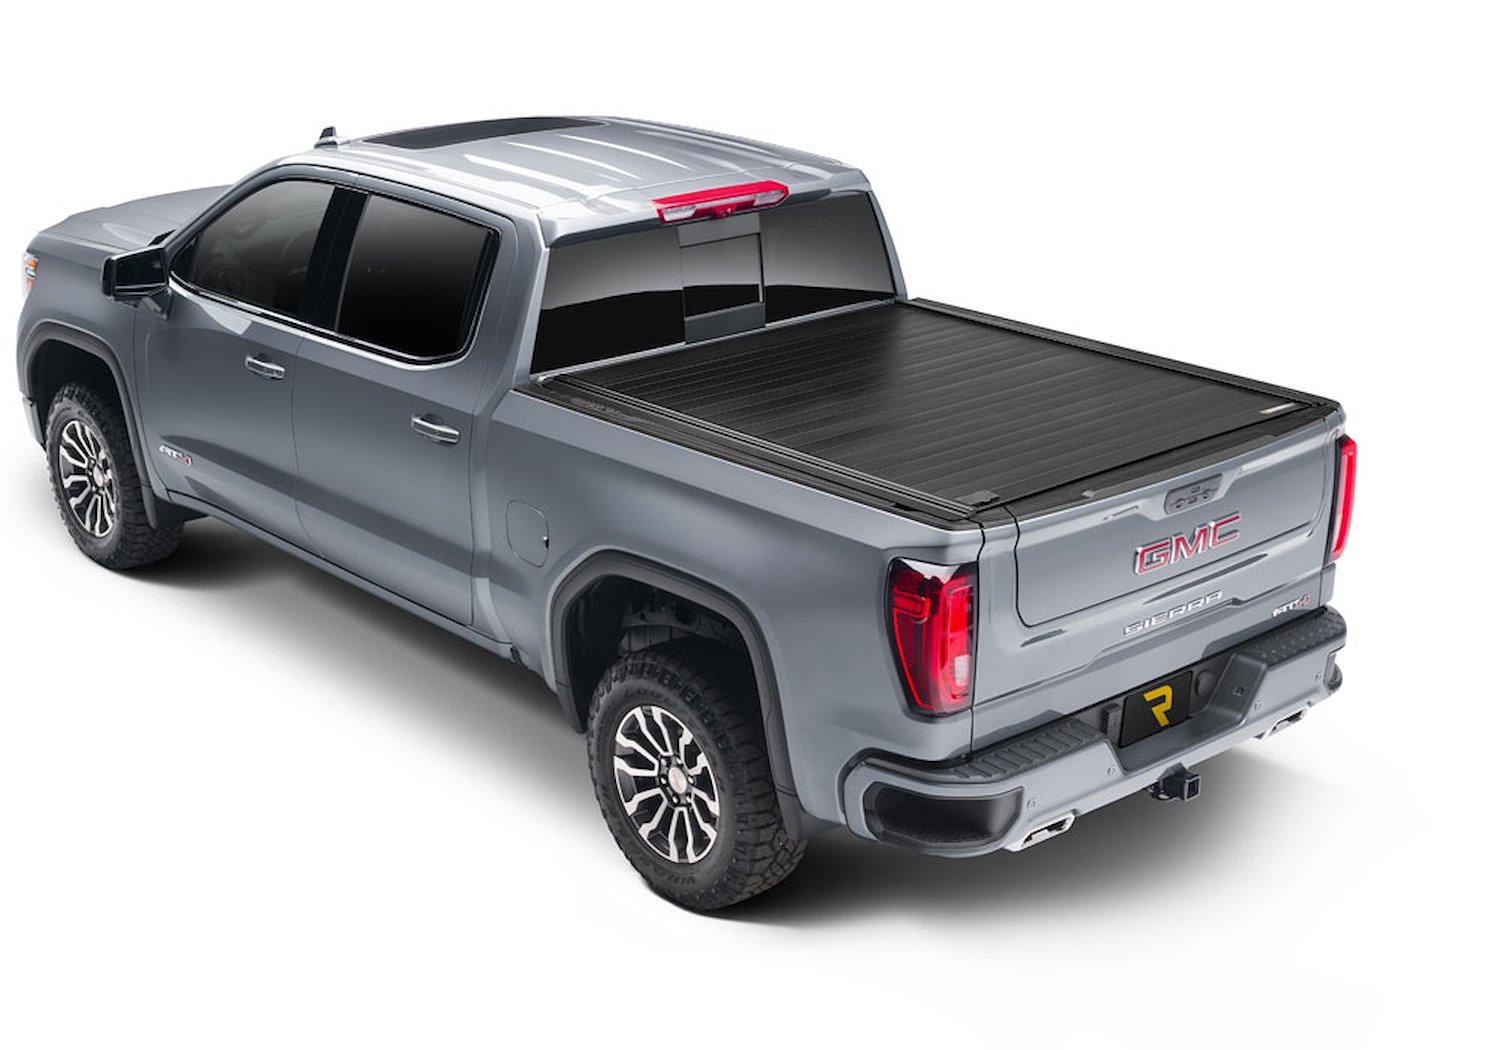 80488 RetraxPRO MX Retractable Tonneau Cover Fits Select GMC Sierra (with CarbonPro Bed) 5' 9" Bed without Stake Pockets